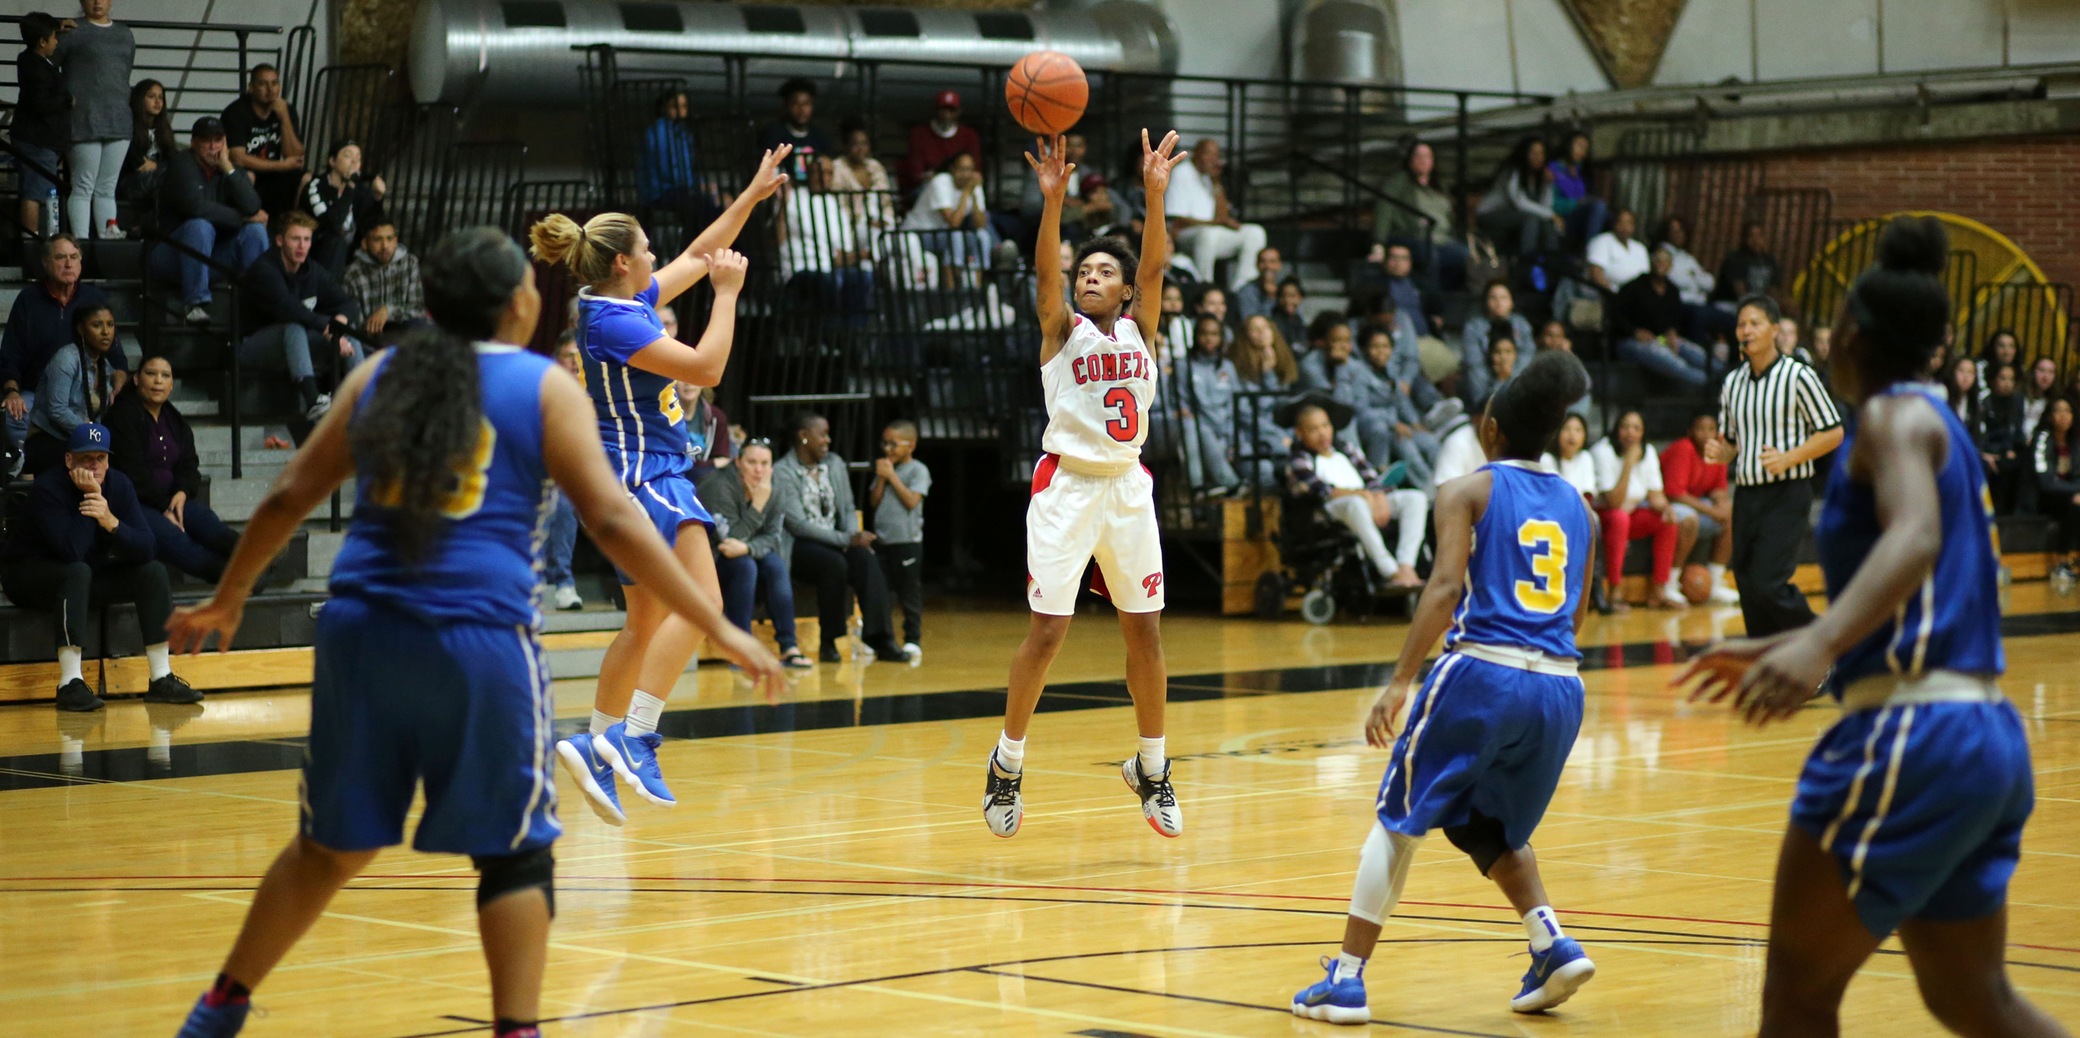 Palomar's Vinessa Perryman drains a 3-pointer in 108-68 victory. -- Photo by Hugh Cox